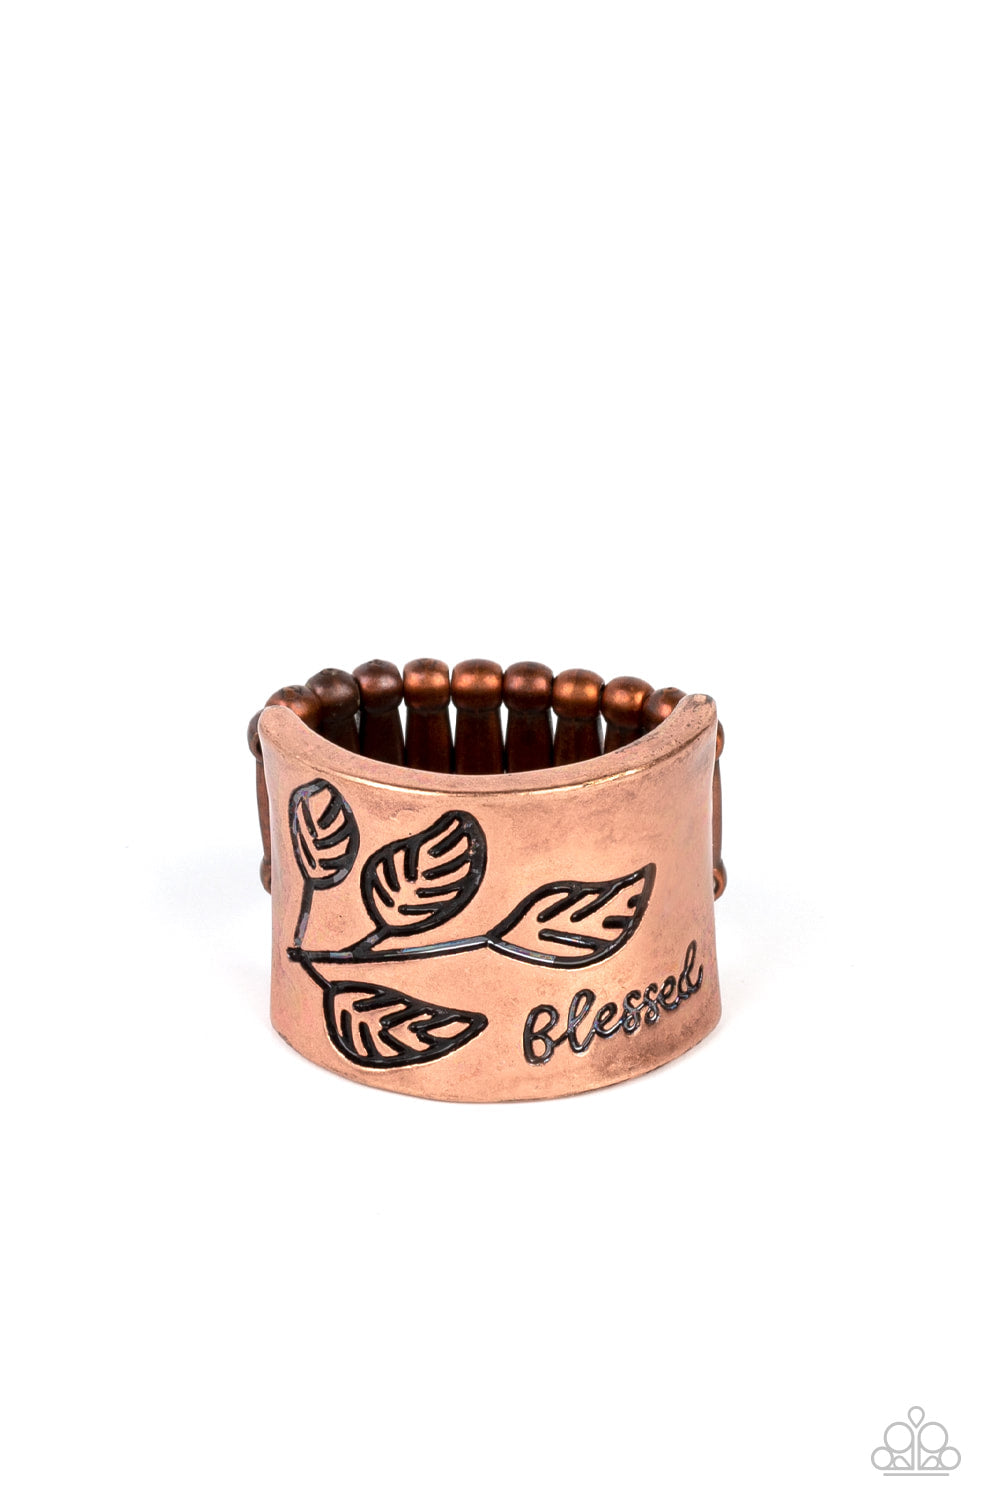 Blessed with Bling - Copper Ring